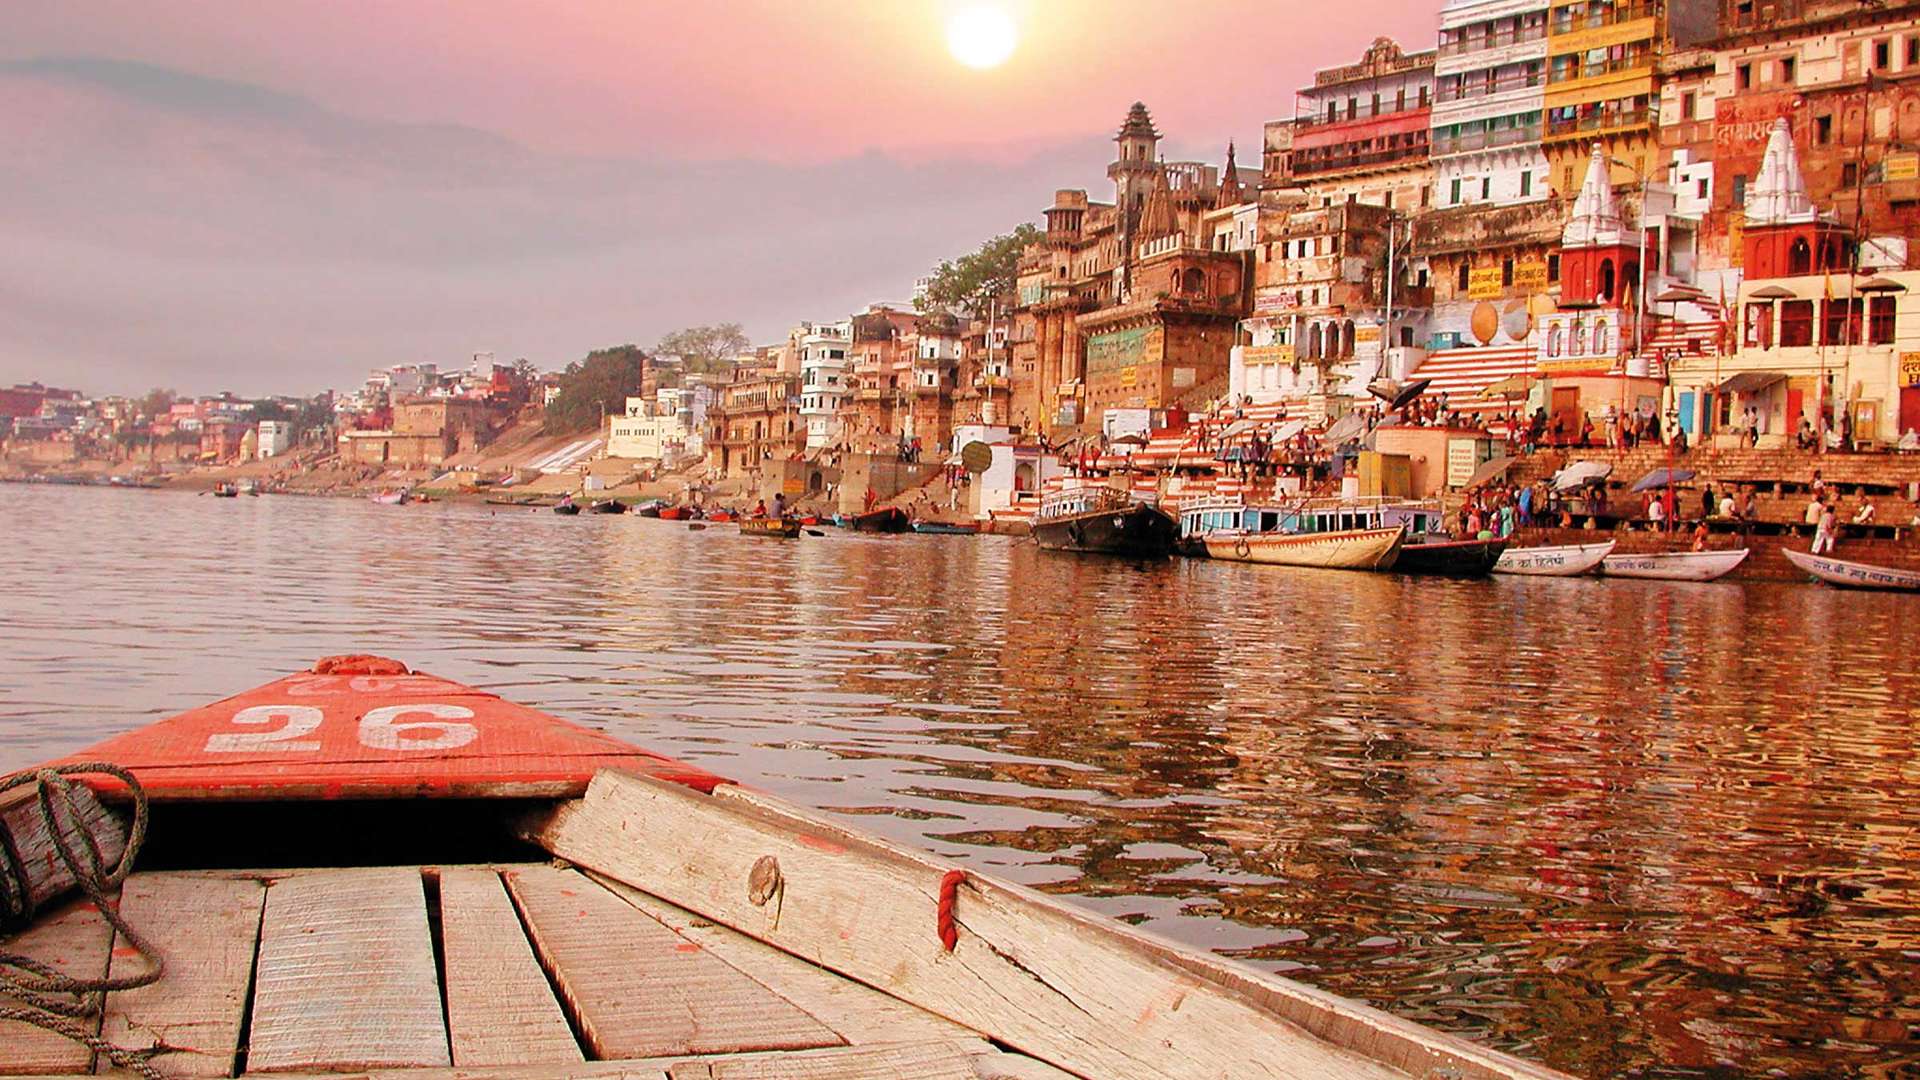 Sunset River Bank On The Ganges, India